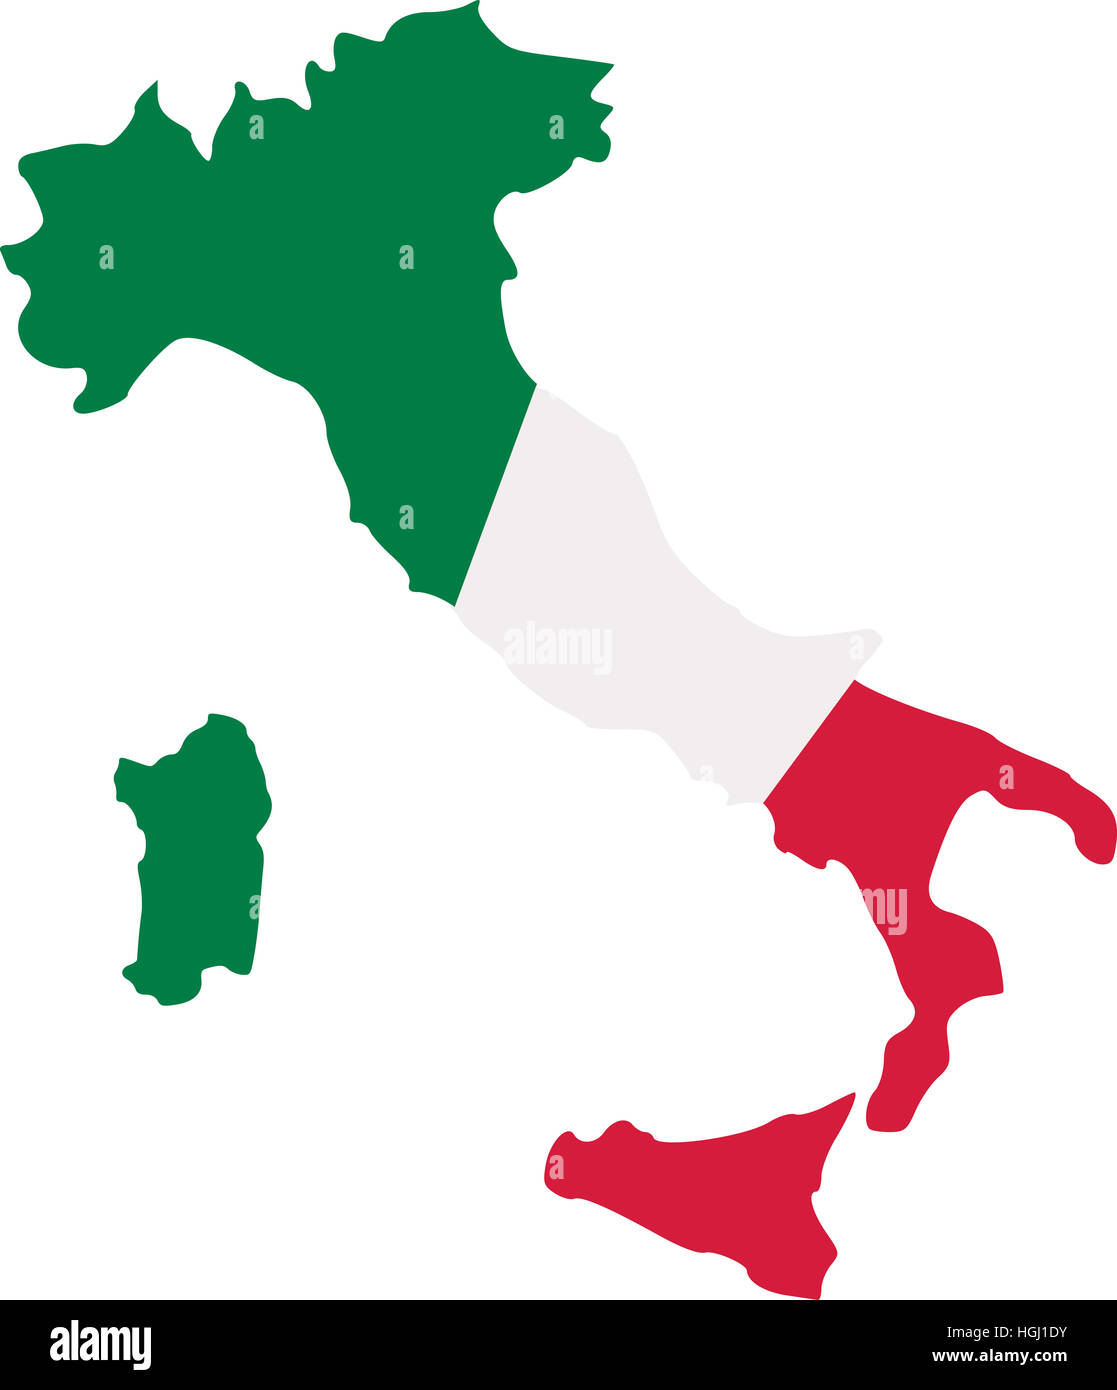 Italy map with flag Stock Photo